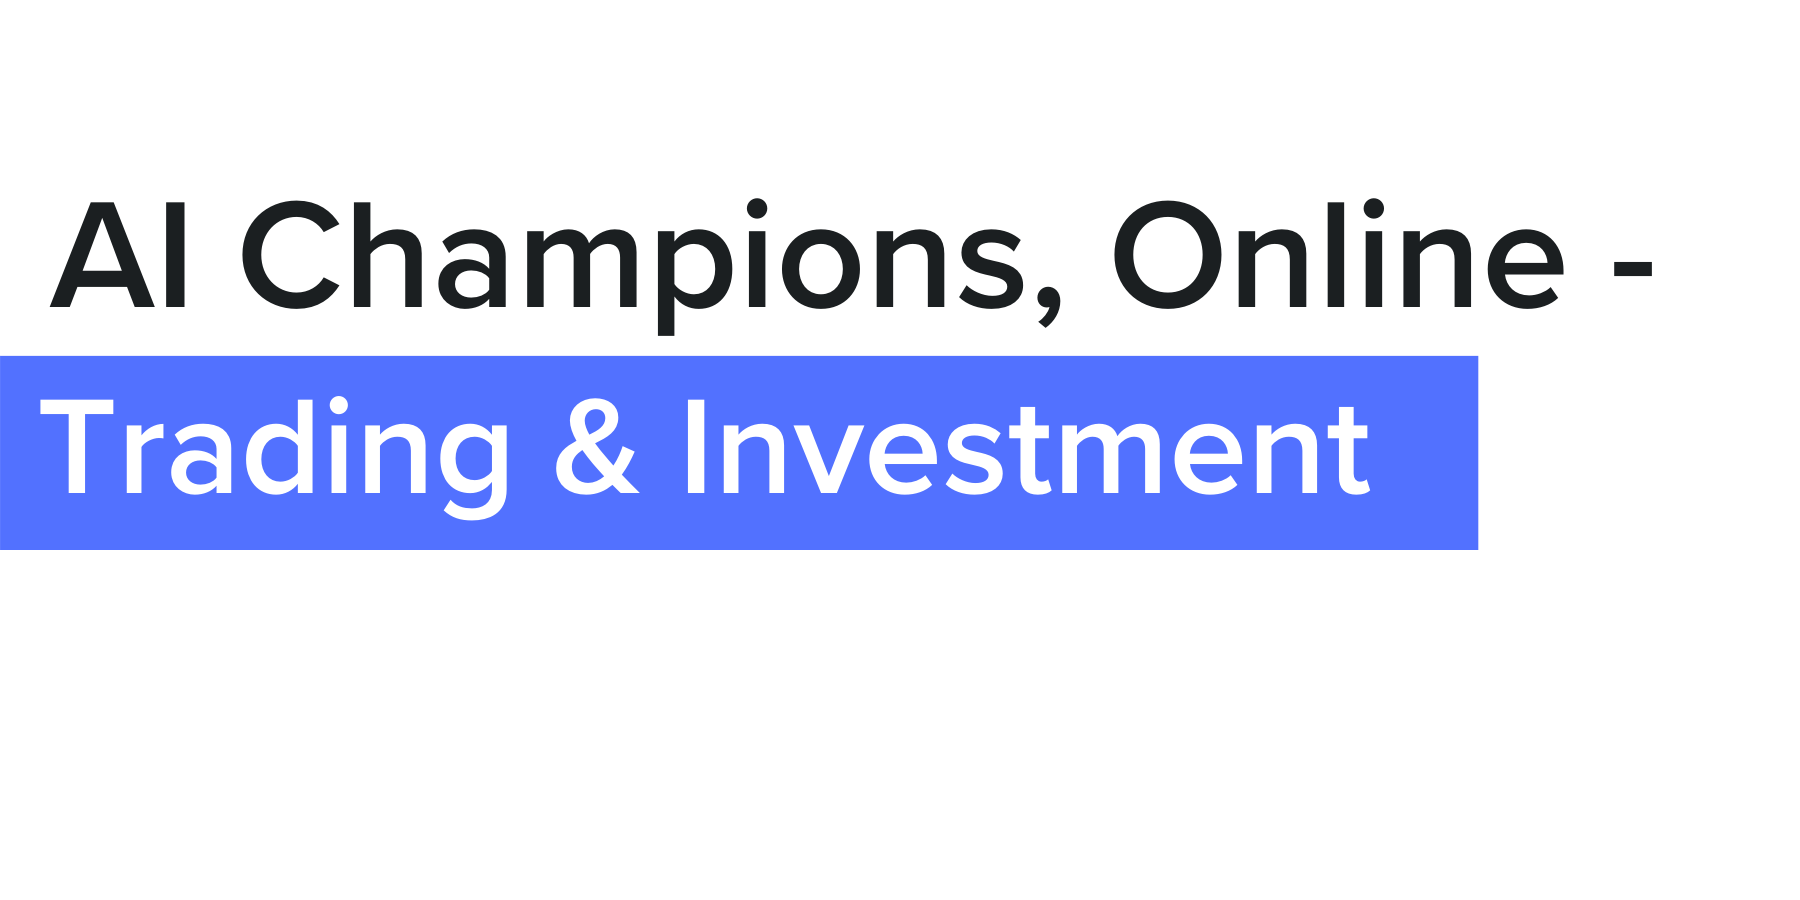 AI Champions, Online - Trading & Investment | October 6 - 9, 2020